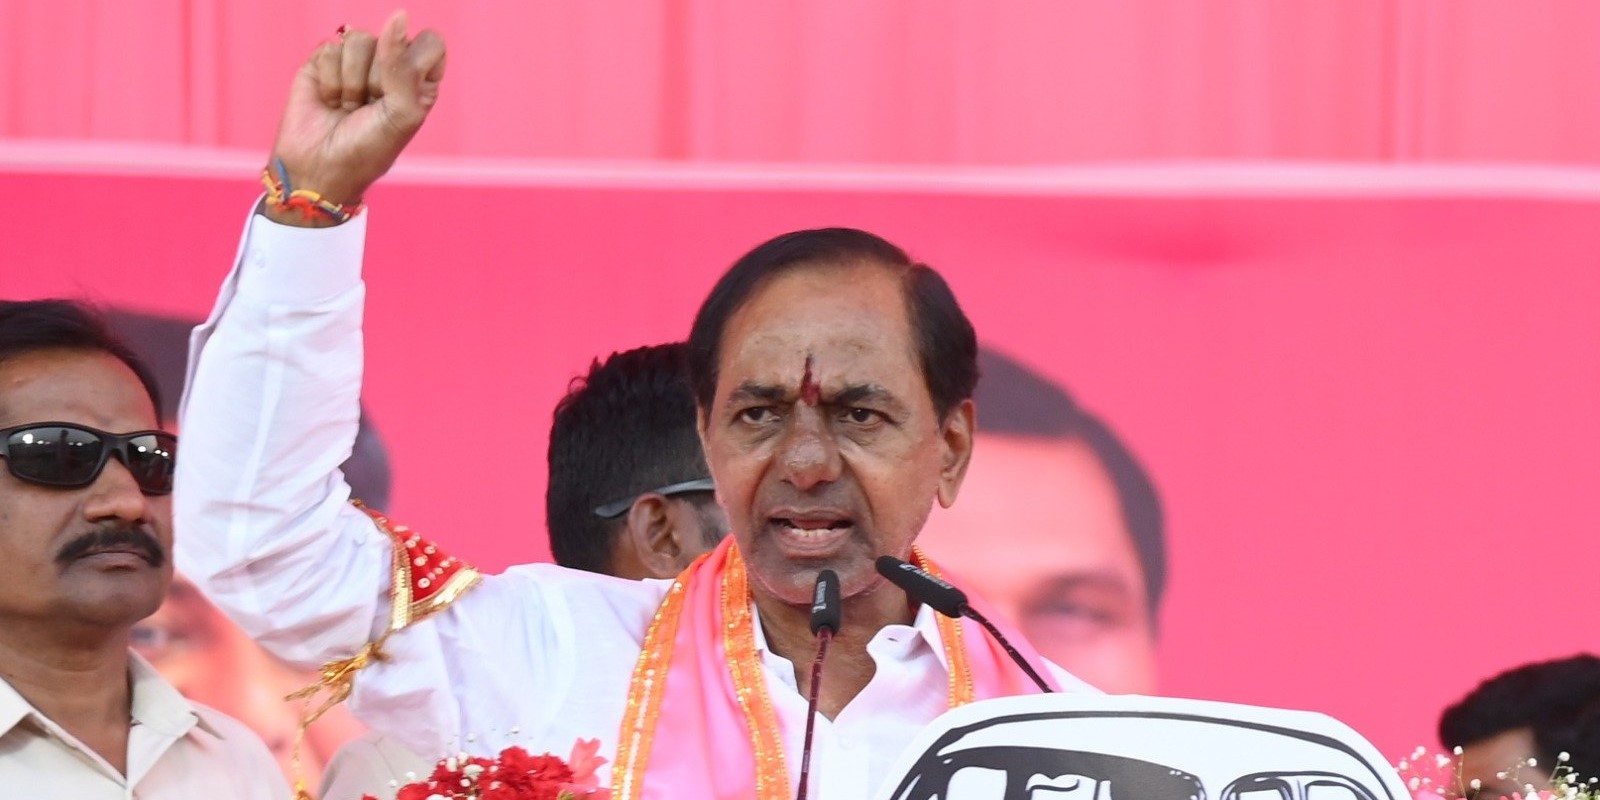 KCR may let son KTR take on role of Leader of Opposition in the Telangana Assembly